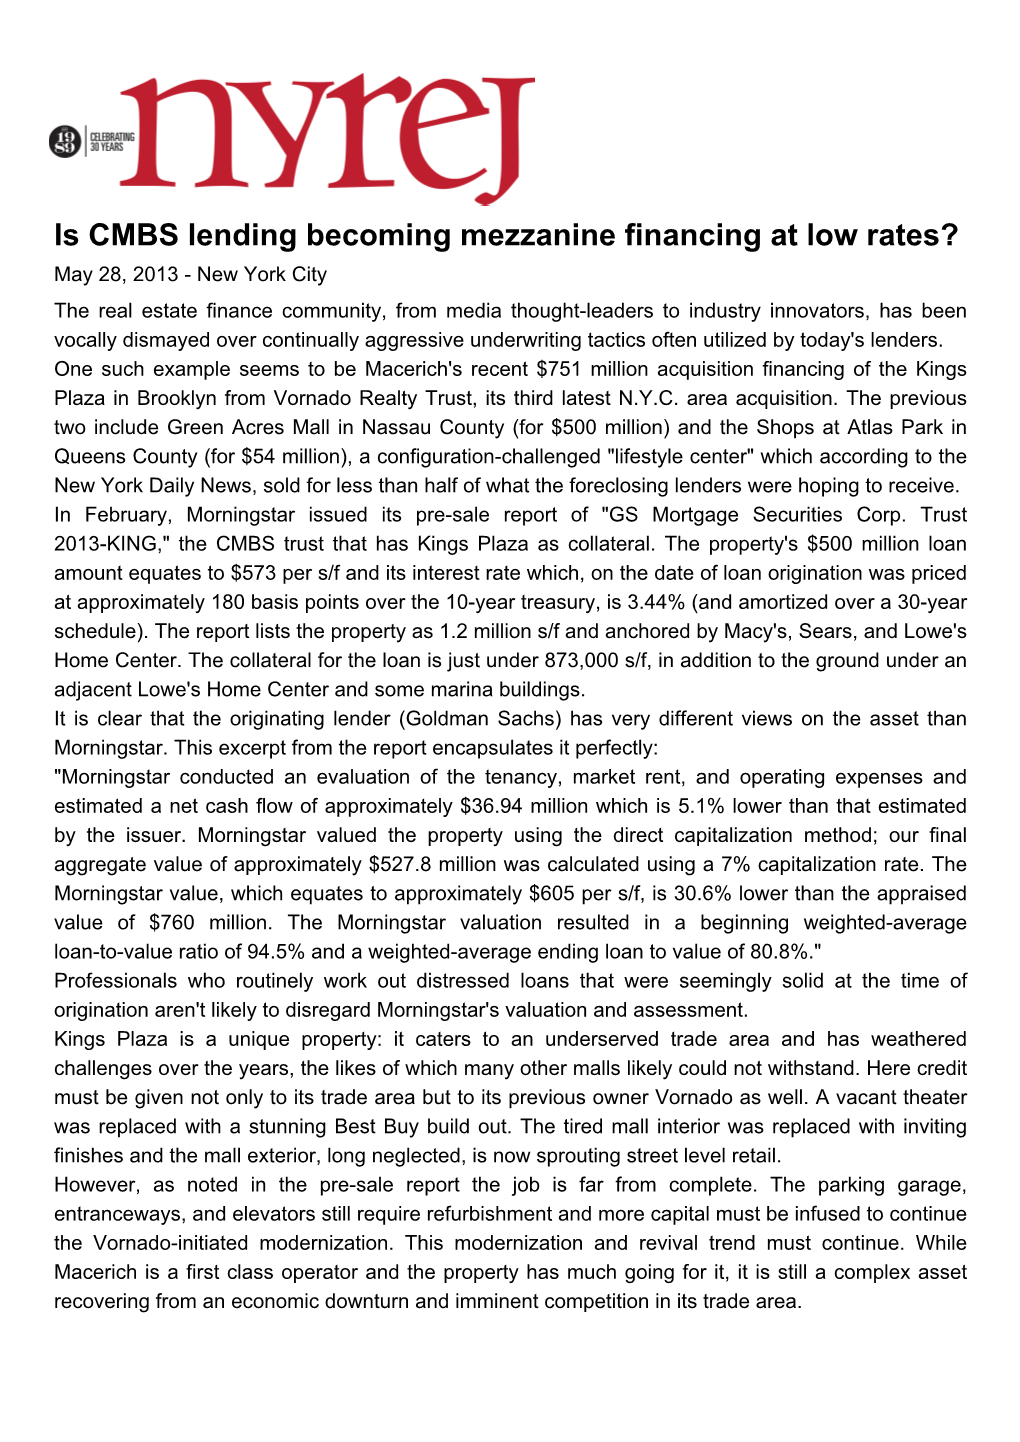 Is CMBS Lending Becoming Mezzanine Financing at Low